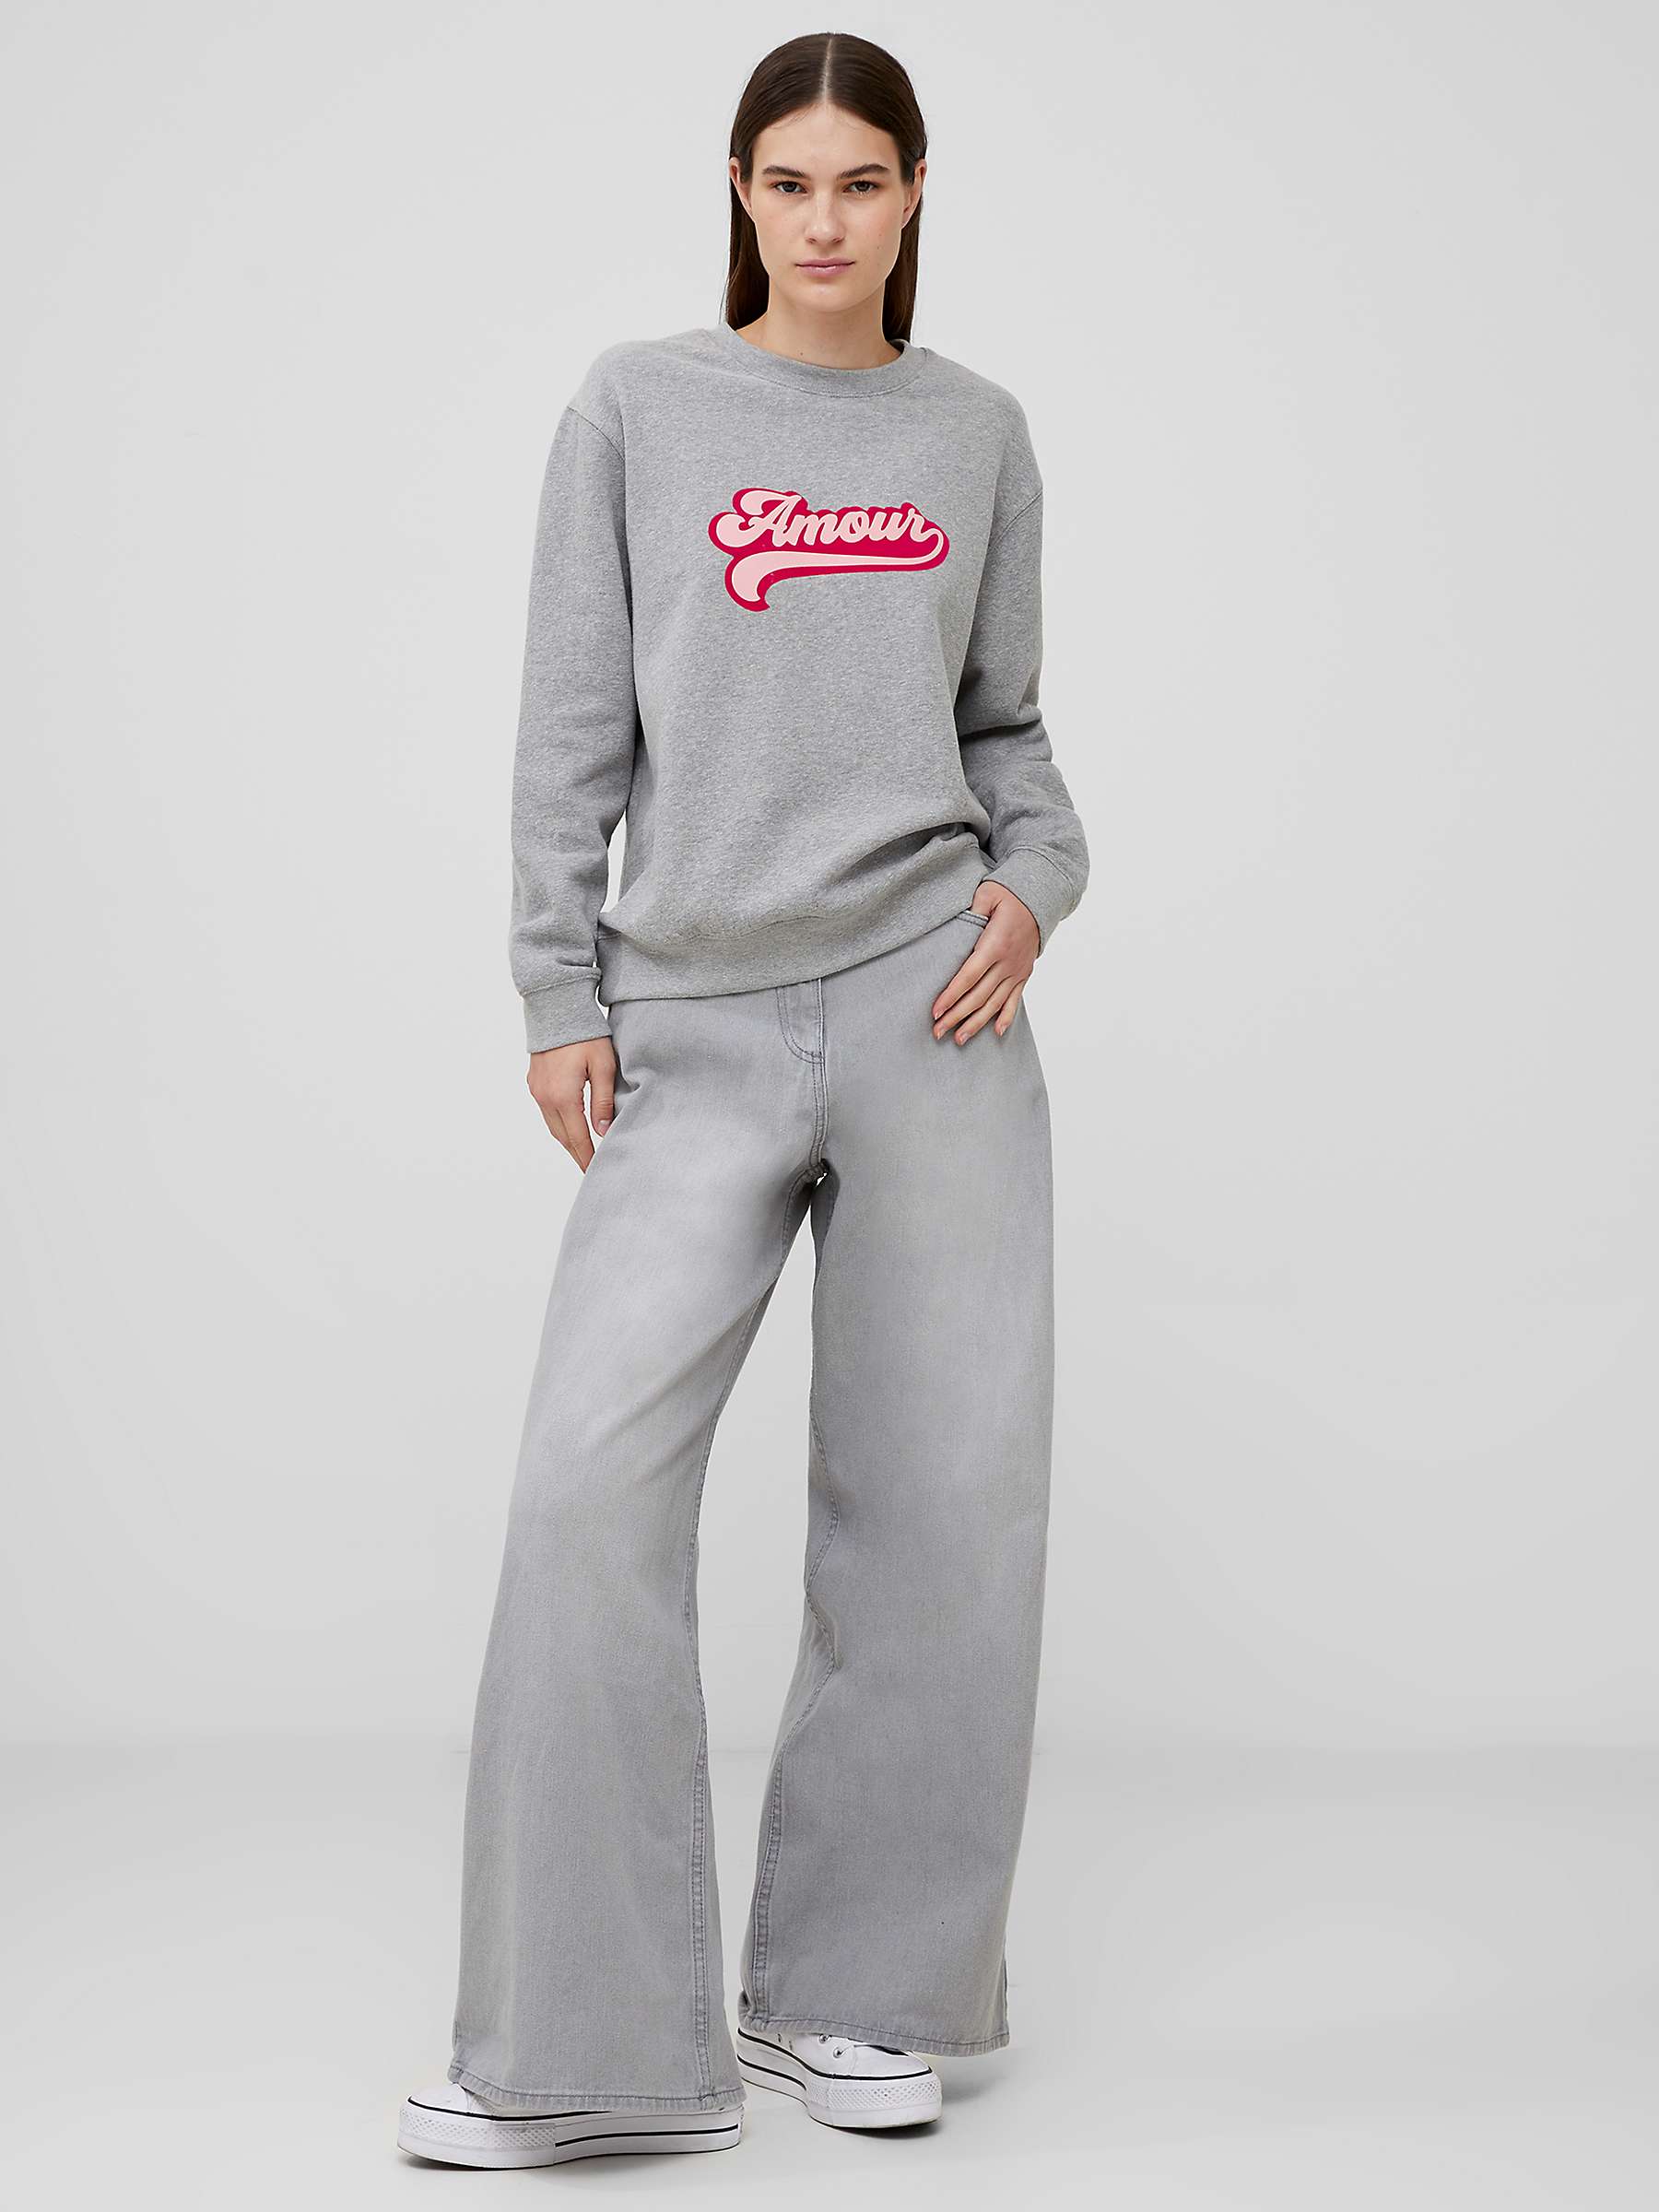 Buy French Connection Amour Graphic Sweatshirt, Light Grey Melange Online at johnlewis.com